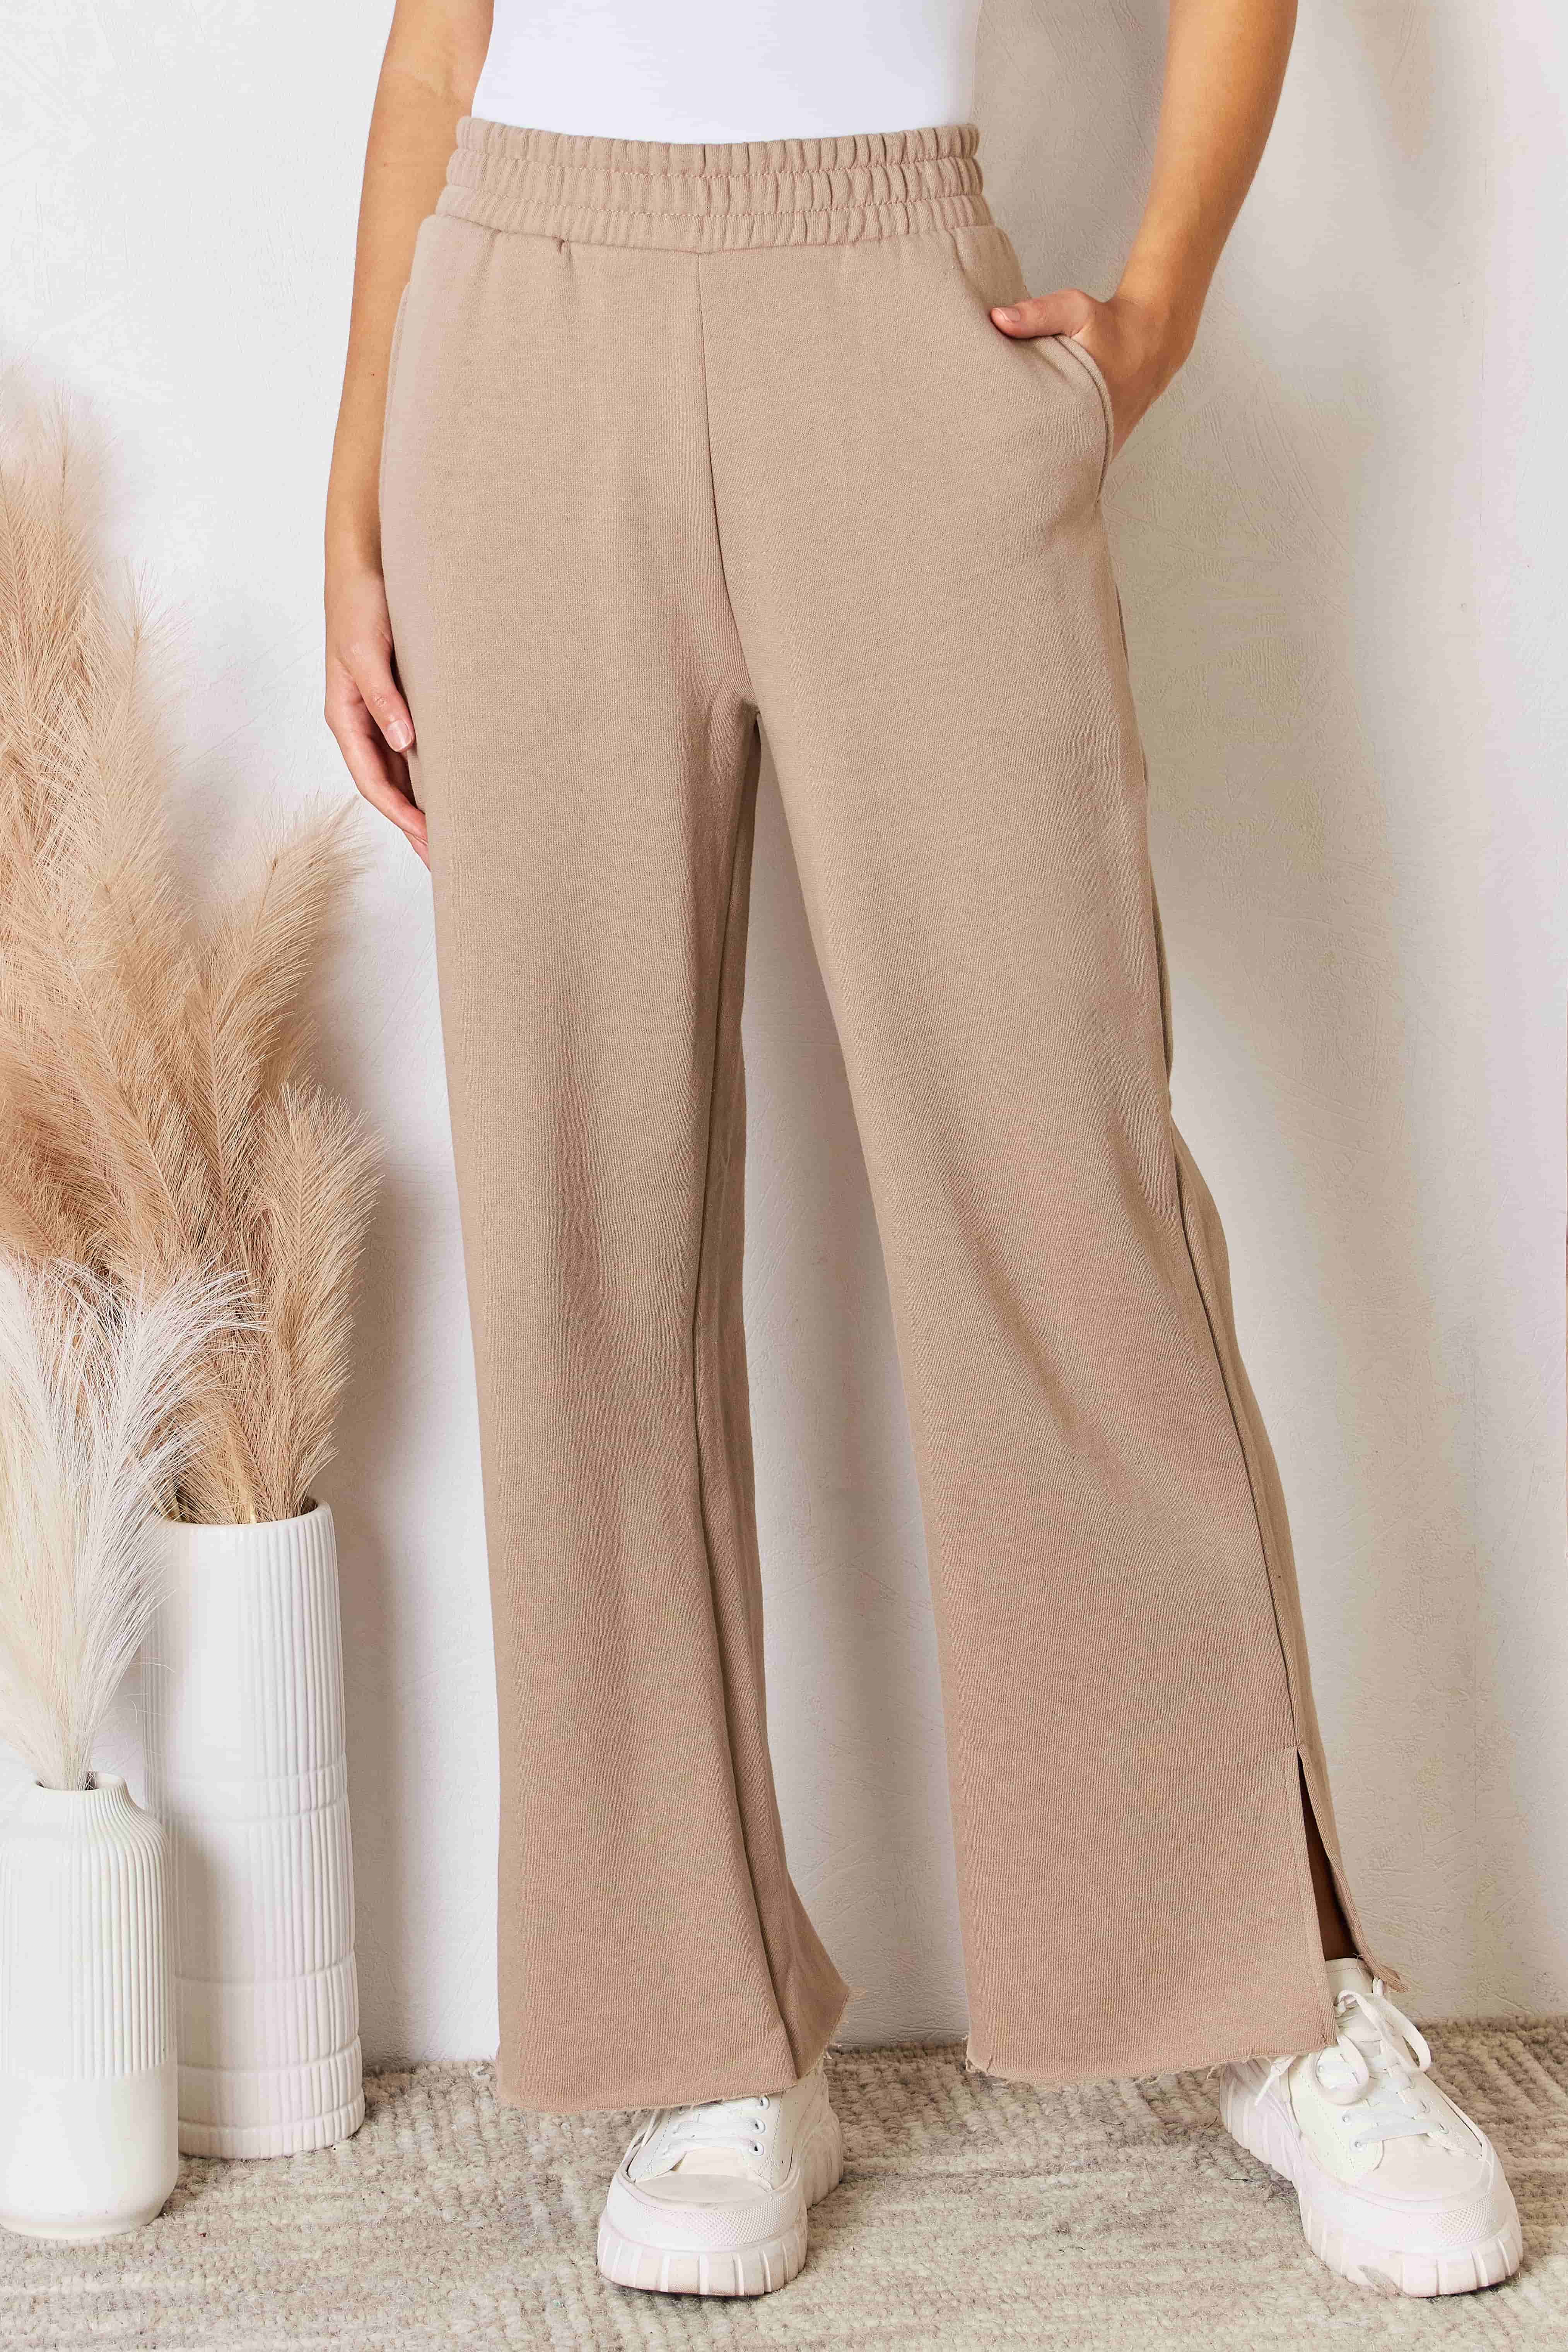 Women's Tan Beige Relaxed Wide Leg Slit Pants with Pockets